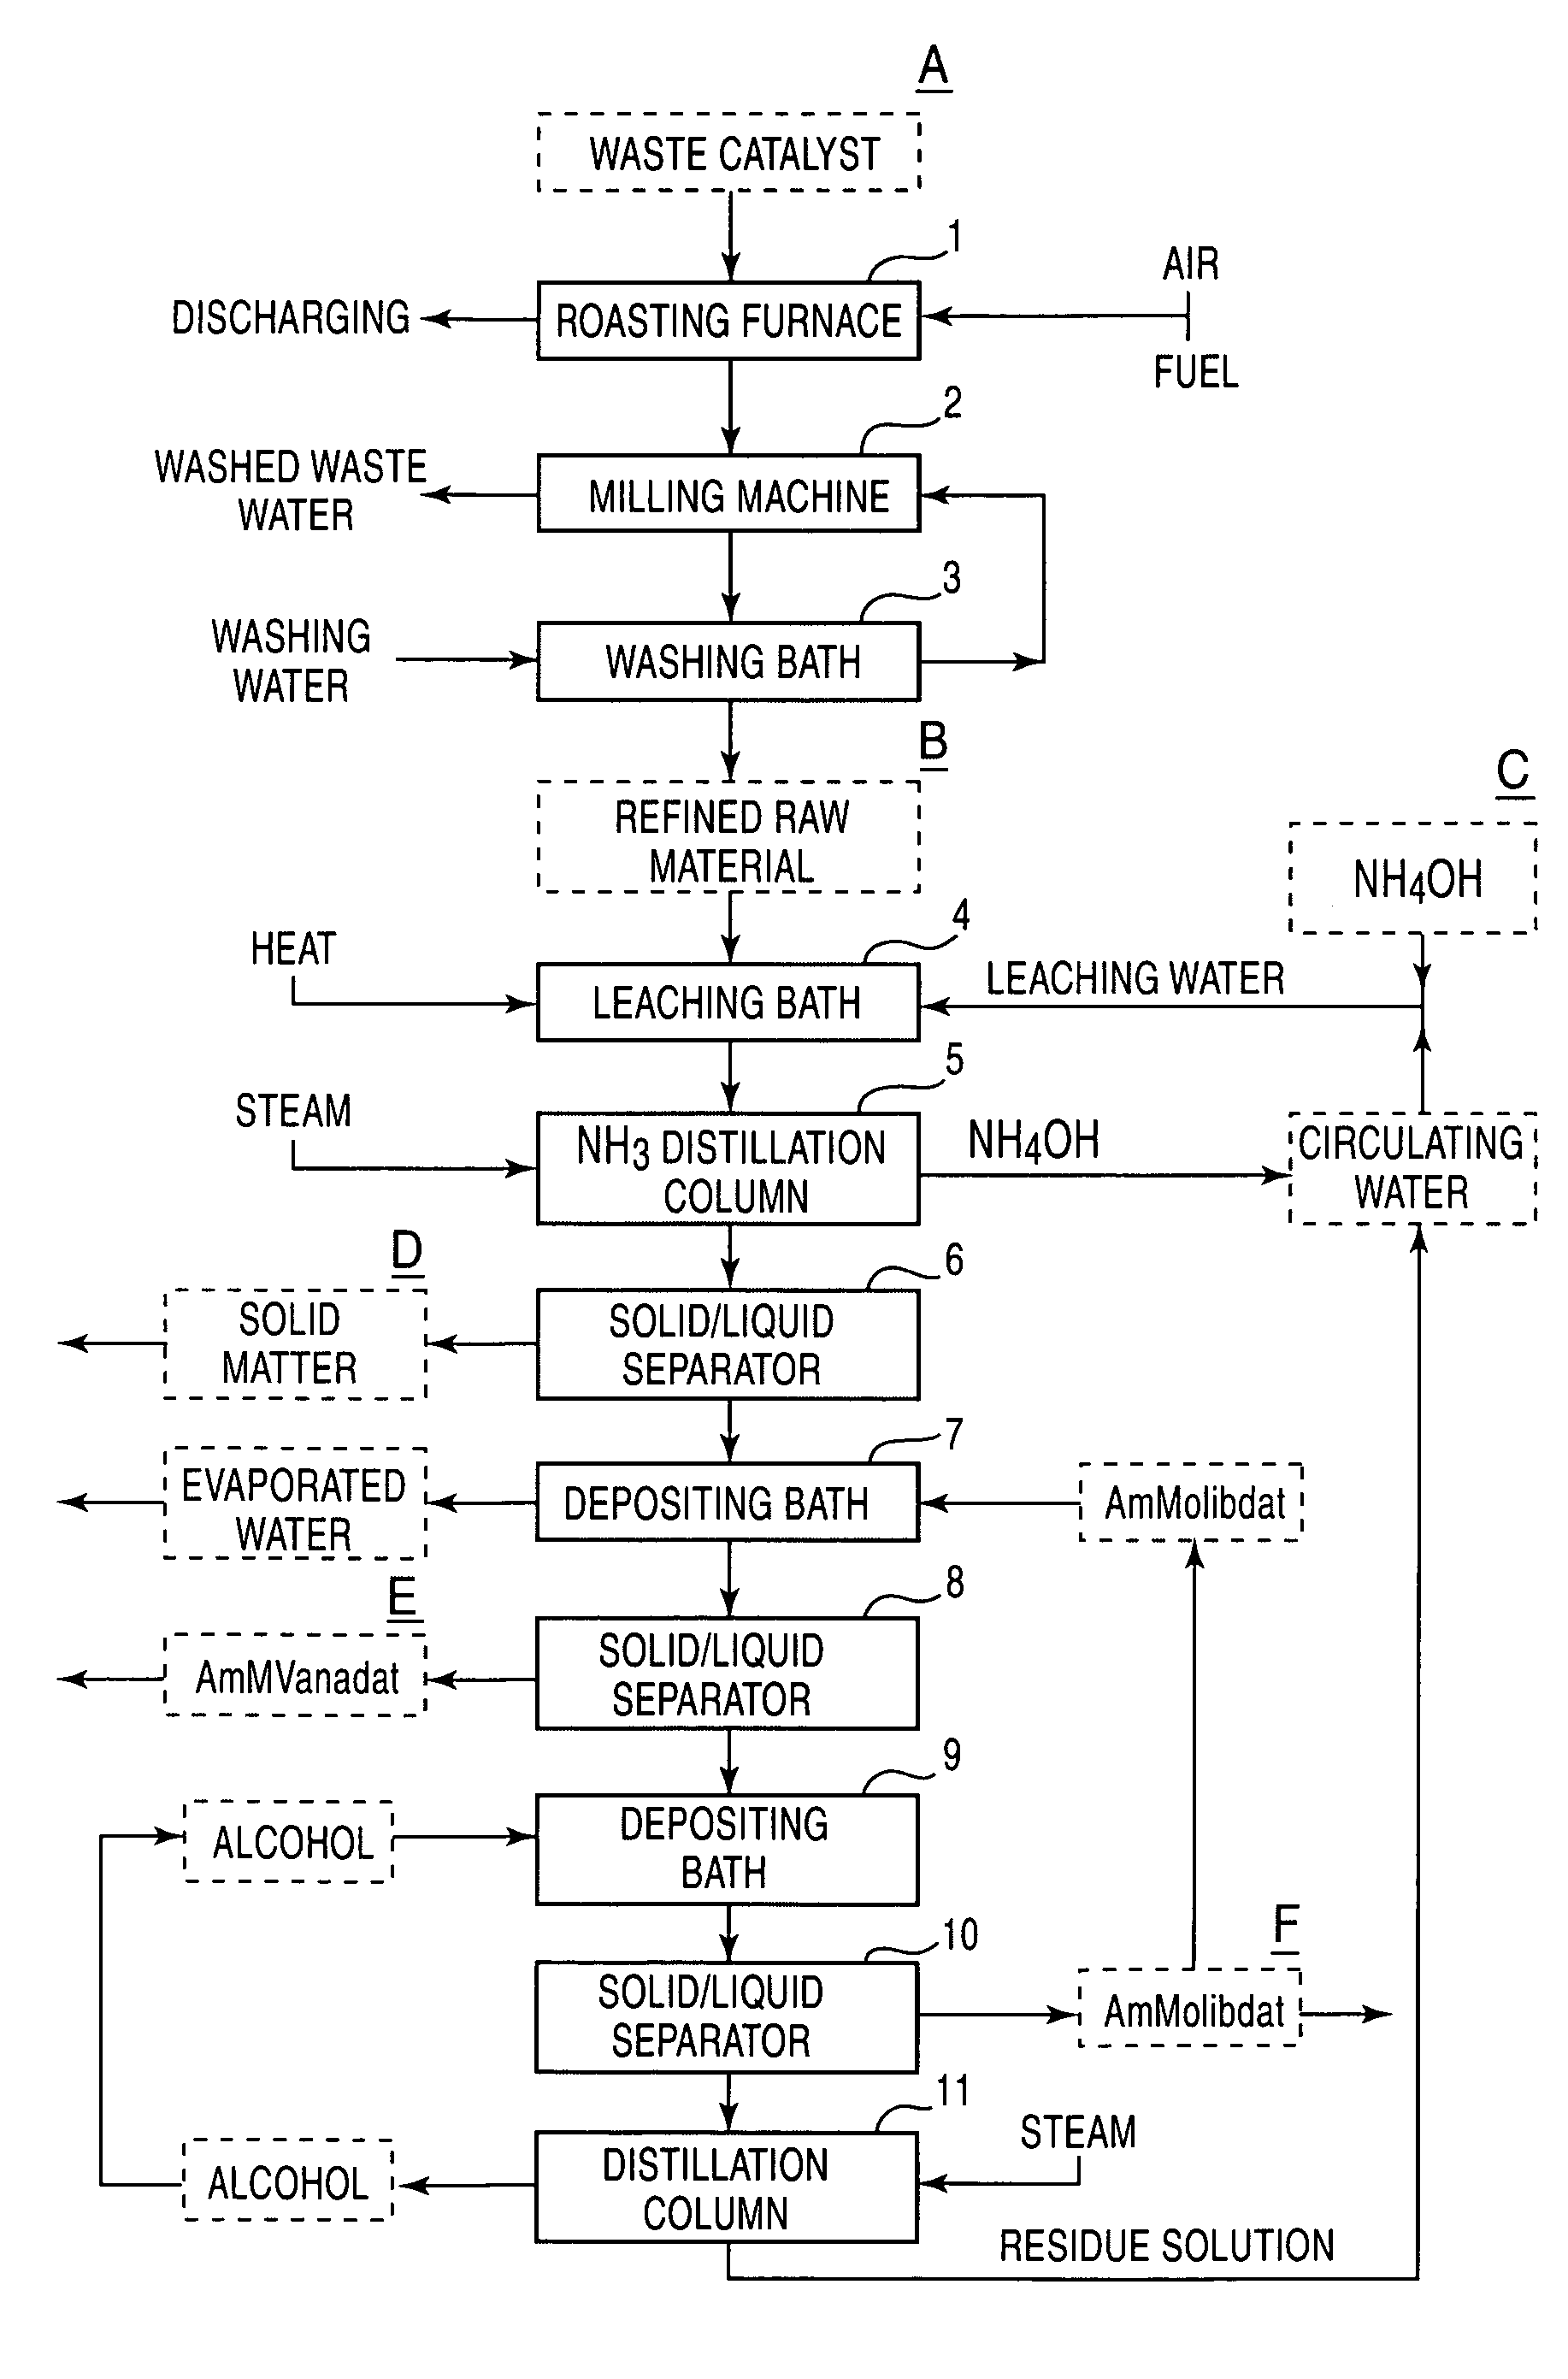 Process for separating and recovering valuable metals